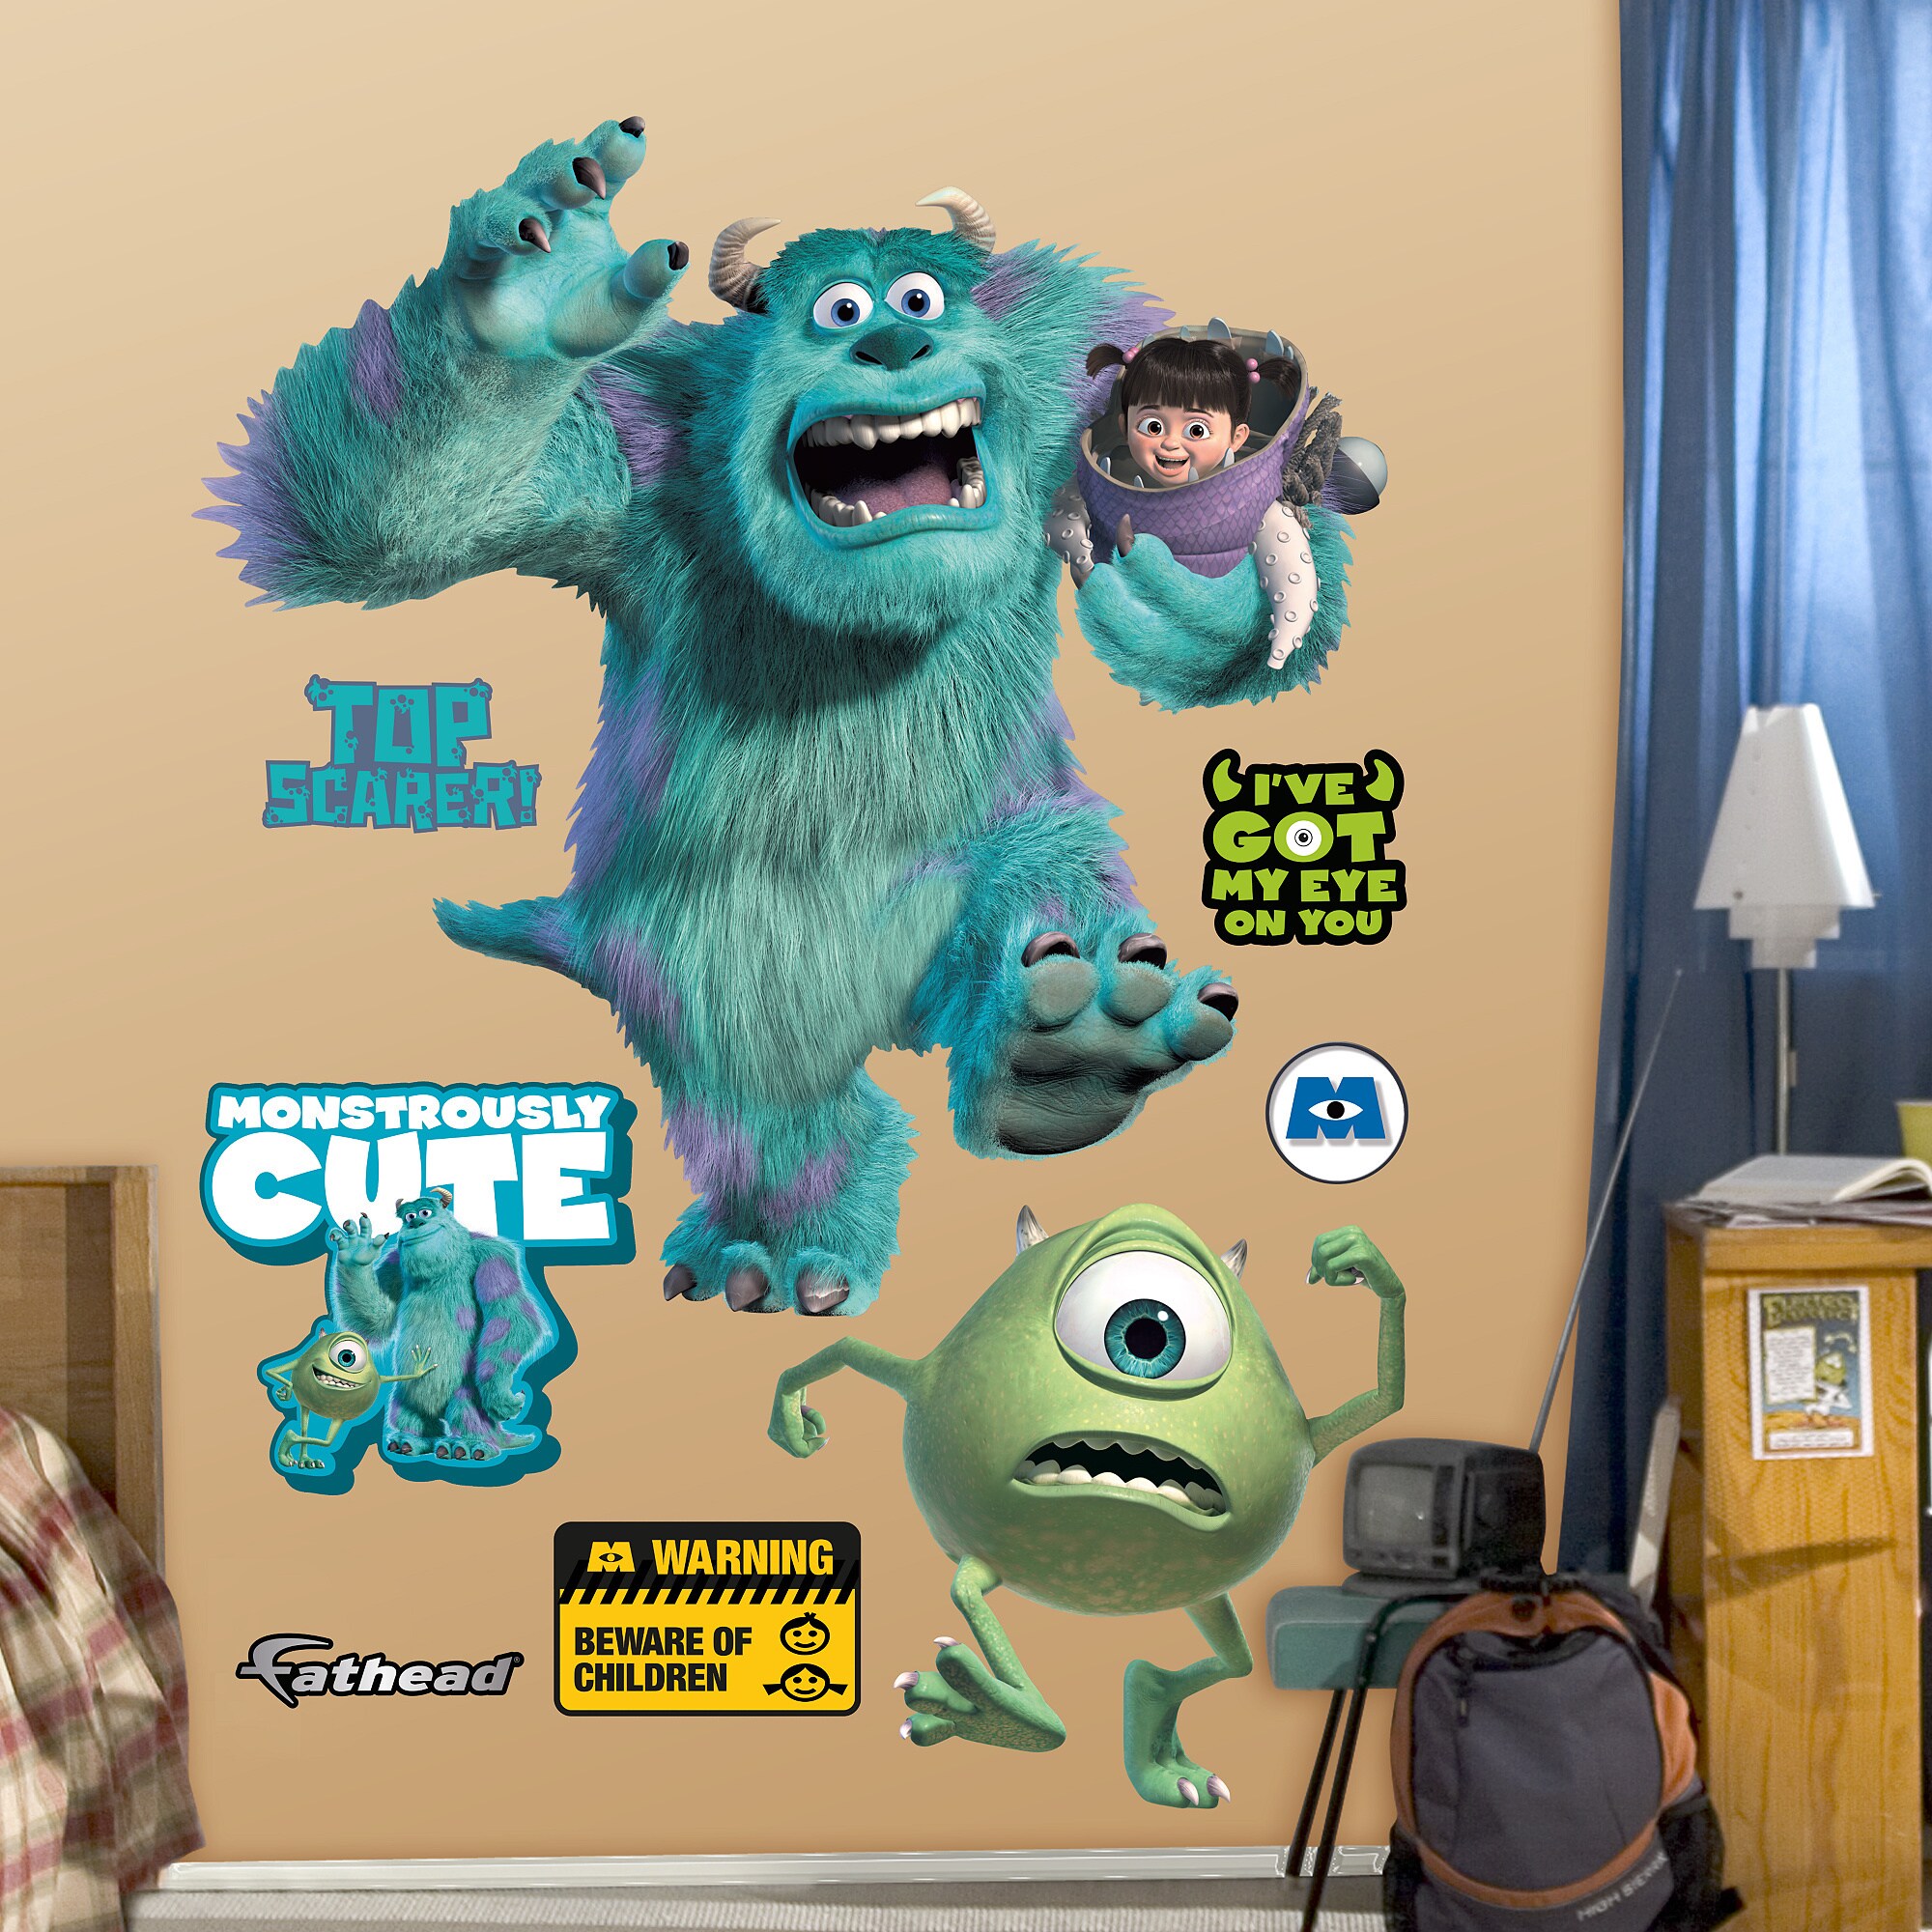 Monsters Inc Giant Mike Wazowski Peel and Stick Wall Decals   14973632